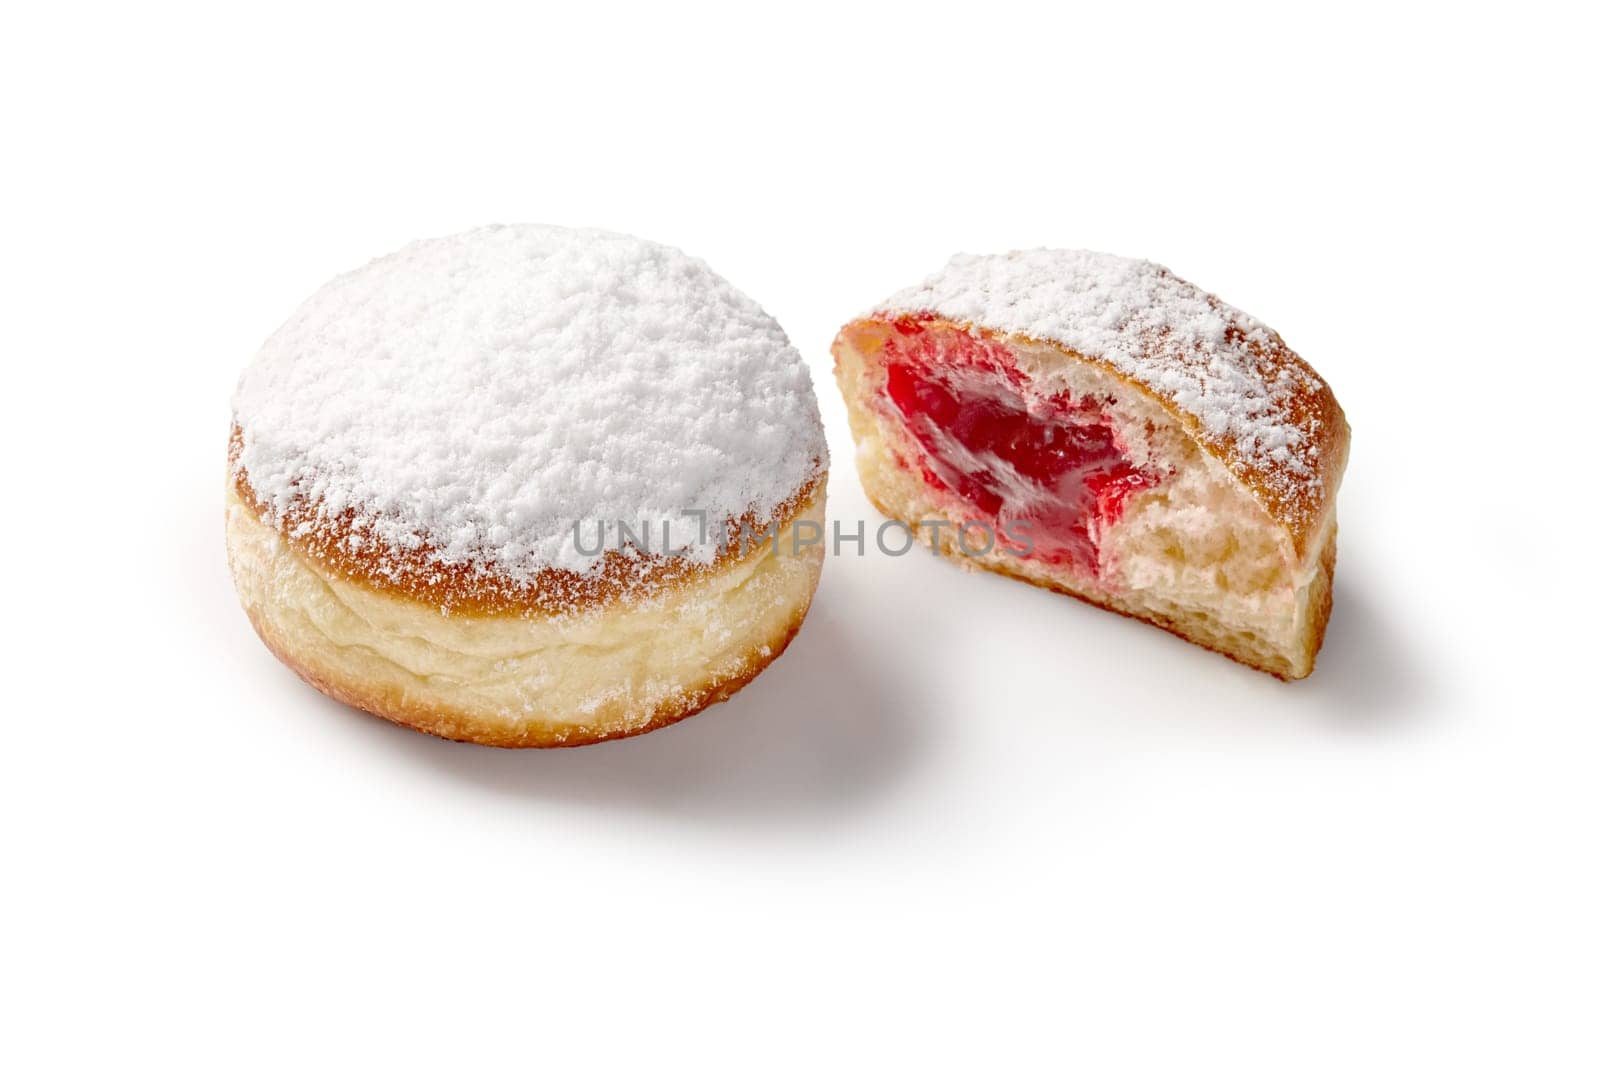 Jelly doughnuts with raspberry filling and powdered sugar by nazarovsergey